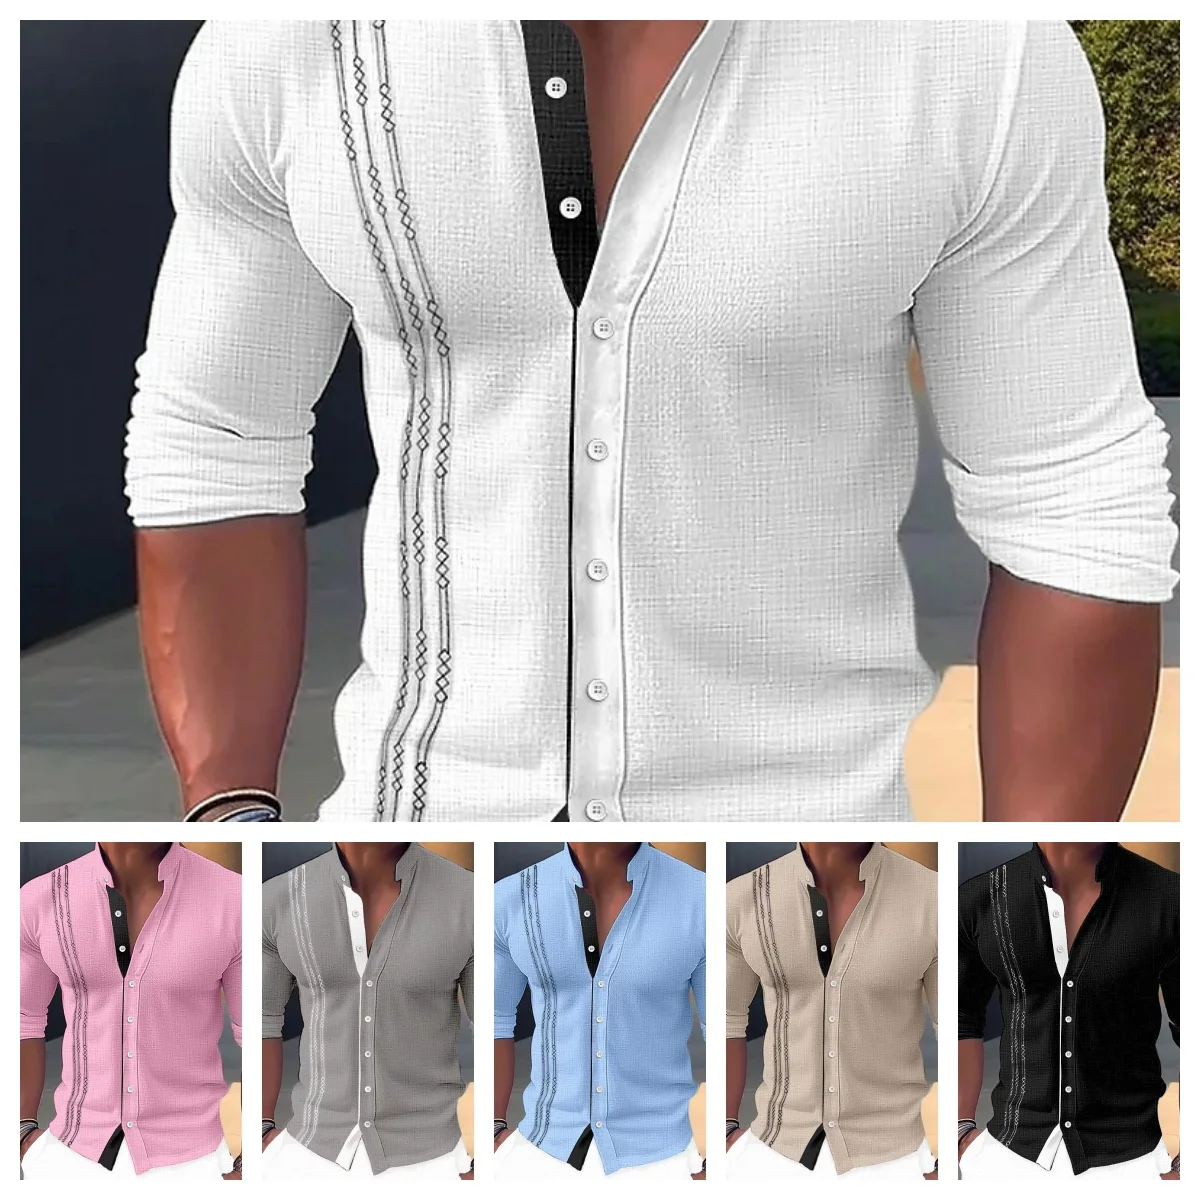 New high quality men spring and autumn fashion Europe and the United States version of long-sleeved leisure, slim handsome busin